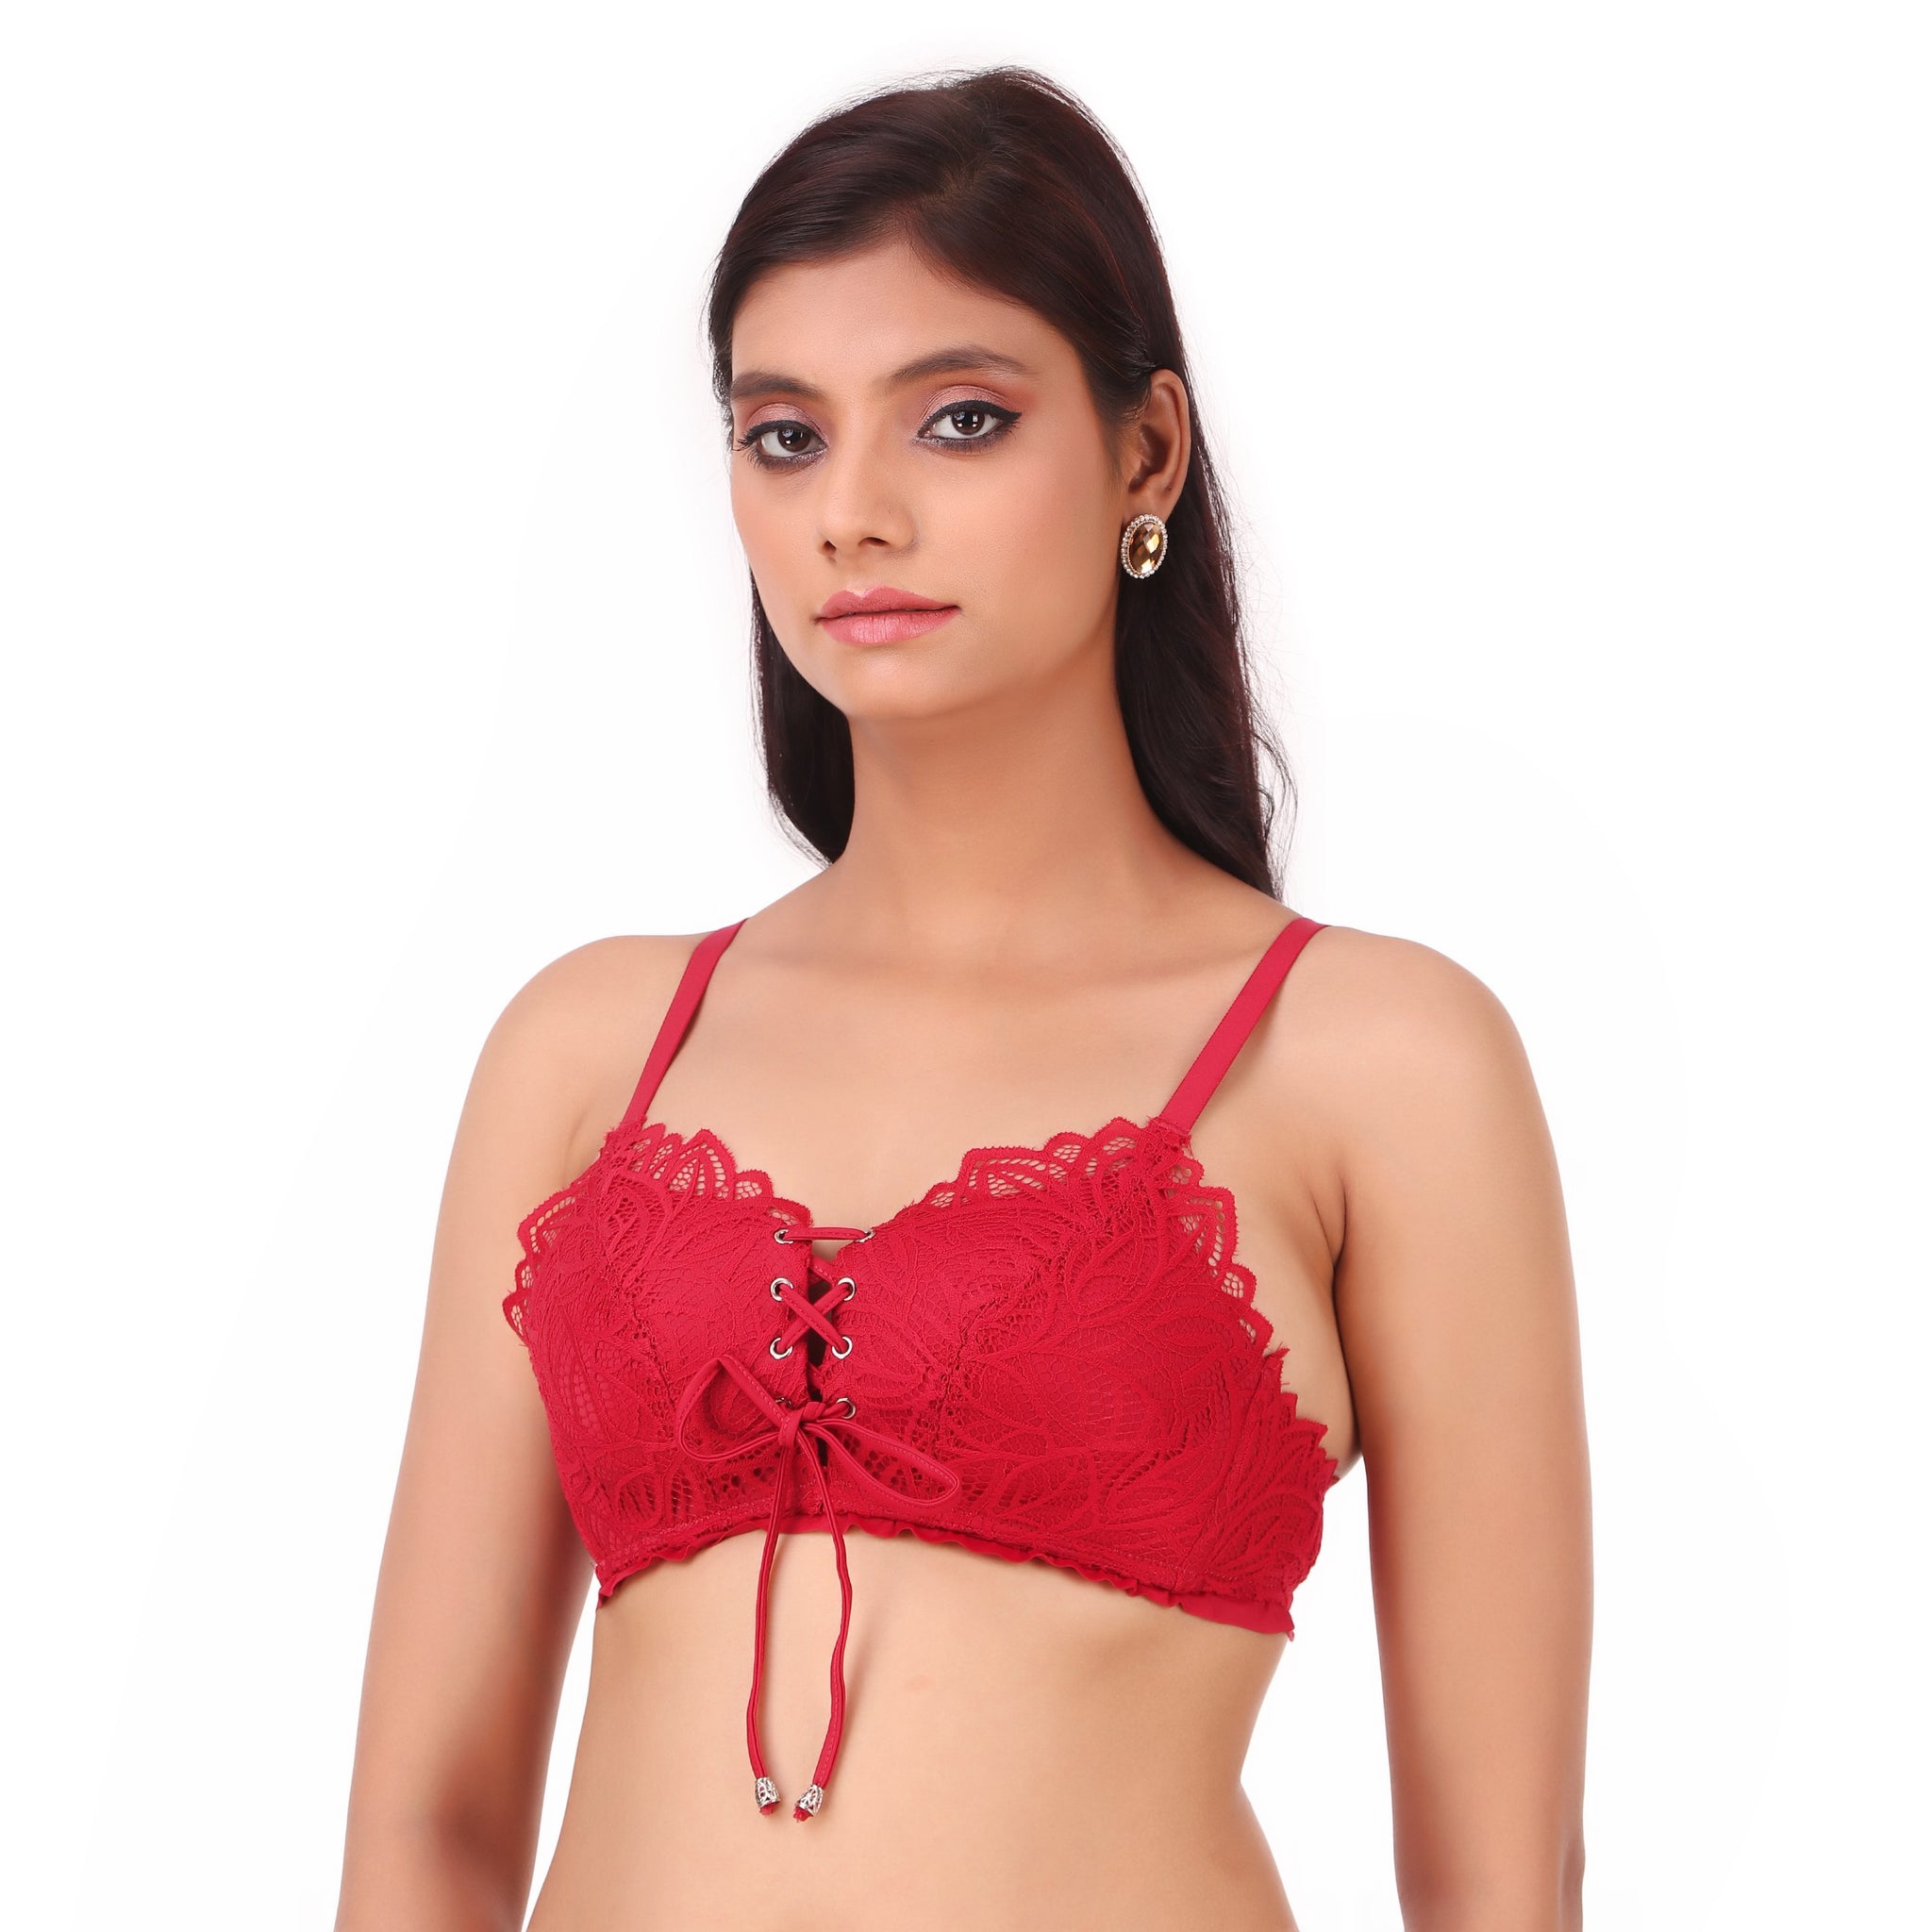 AXTZH-XBRA119 lace it up front bra and panty set